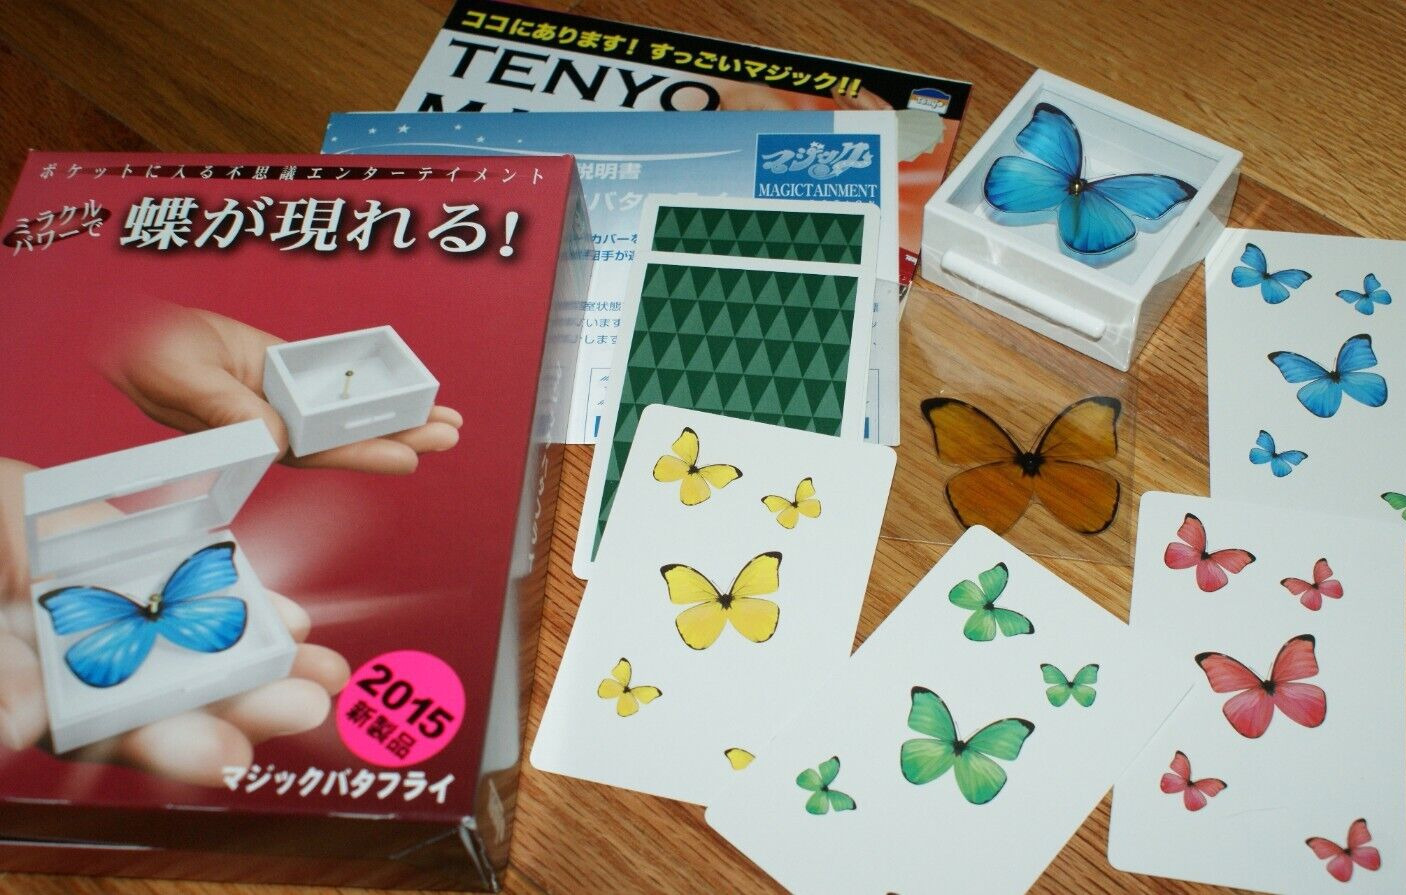 Magic Butterfly --TENYO T-262  (2015) -- colorful effect; handy prop, too   TMGS